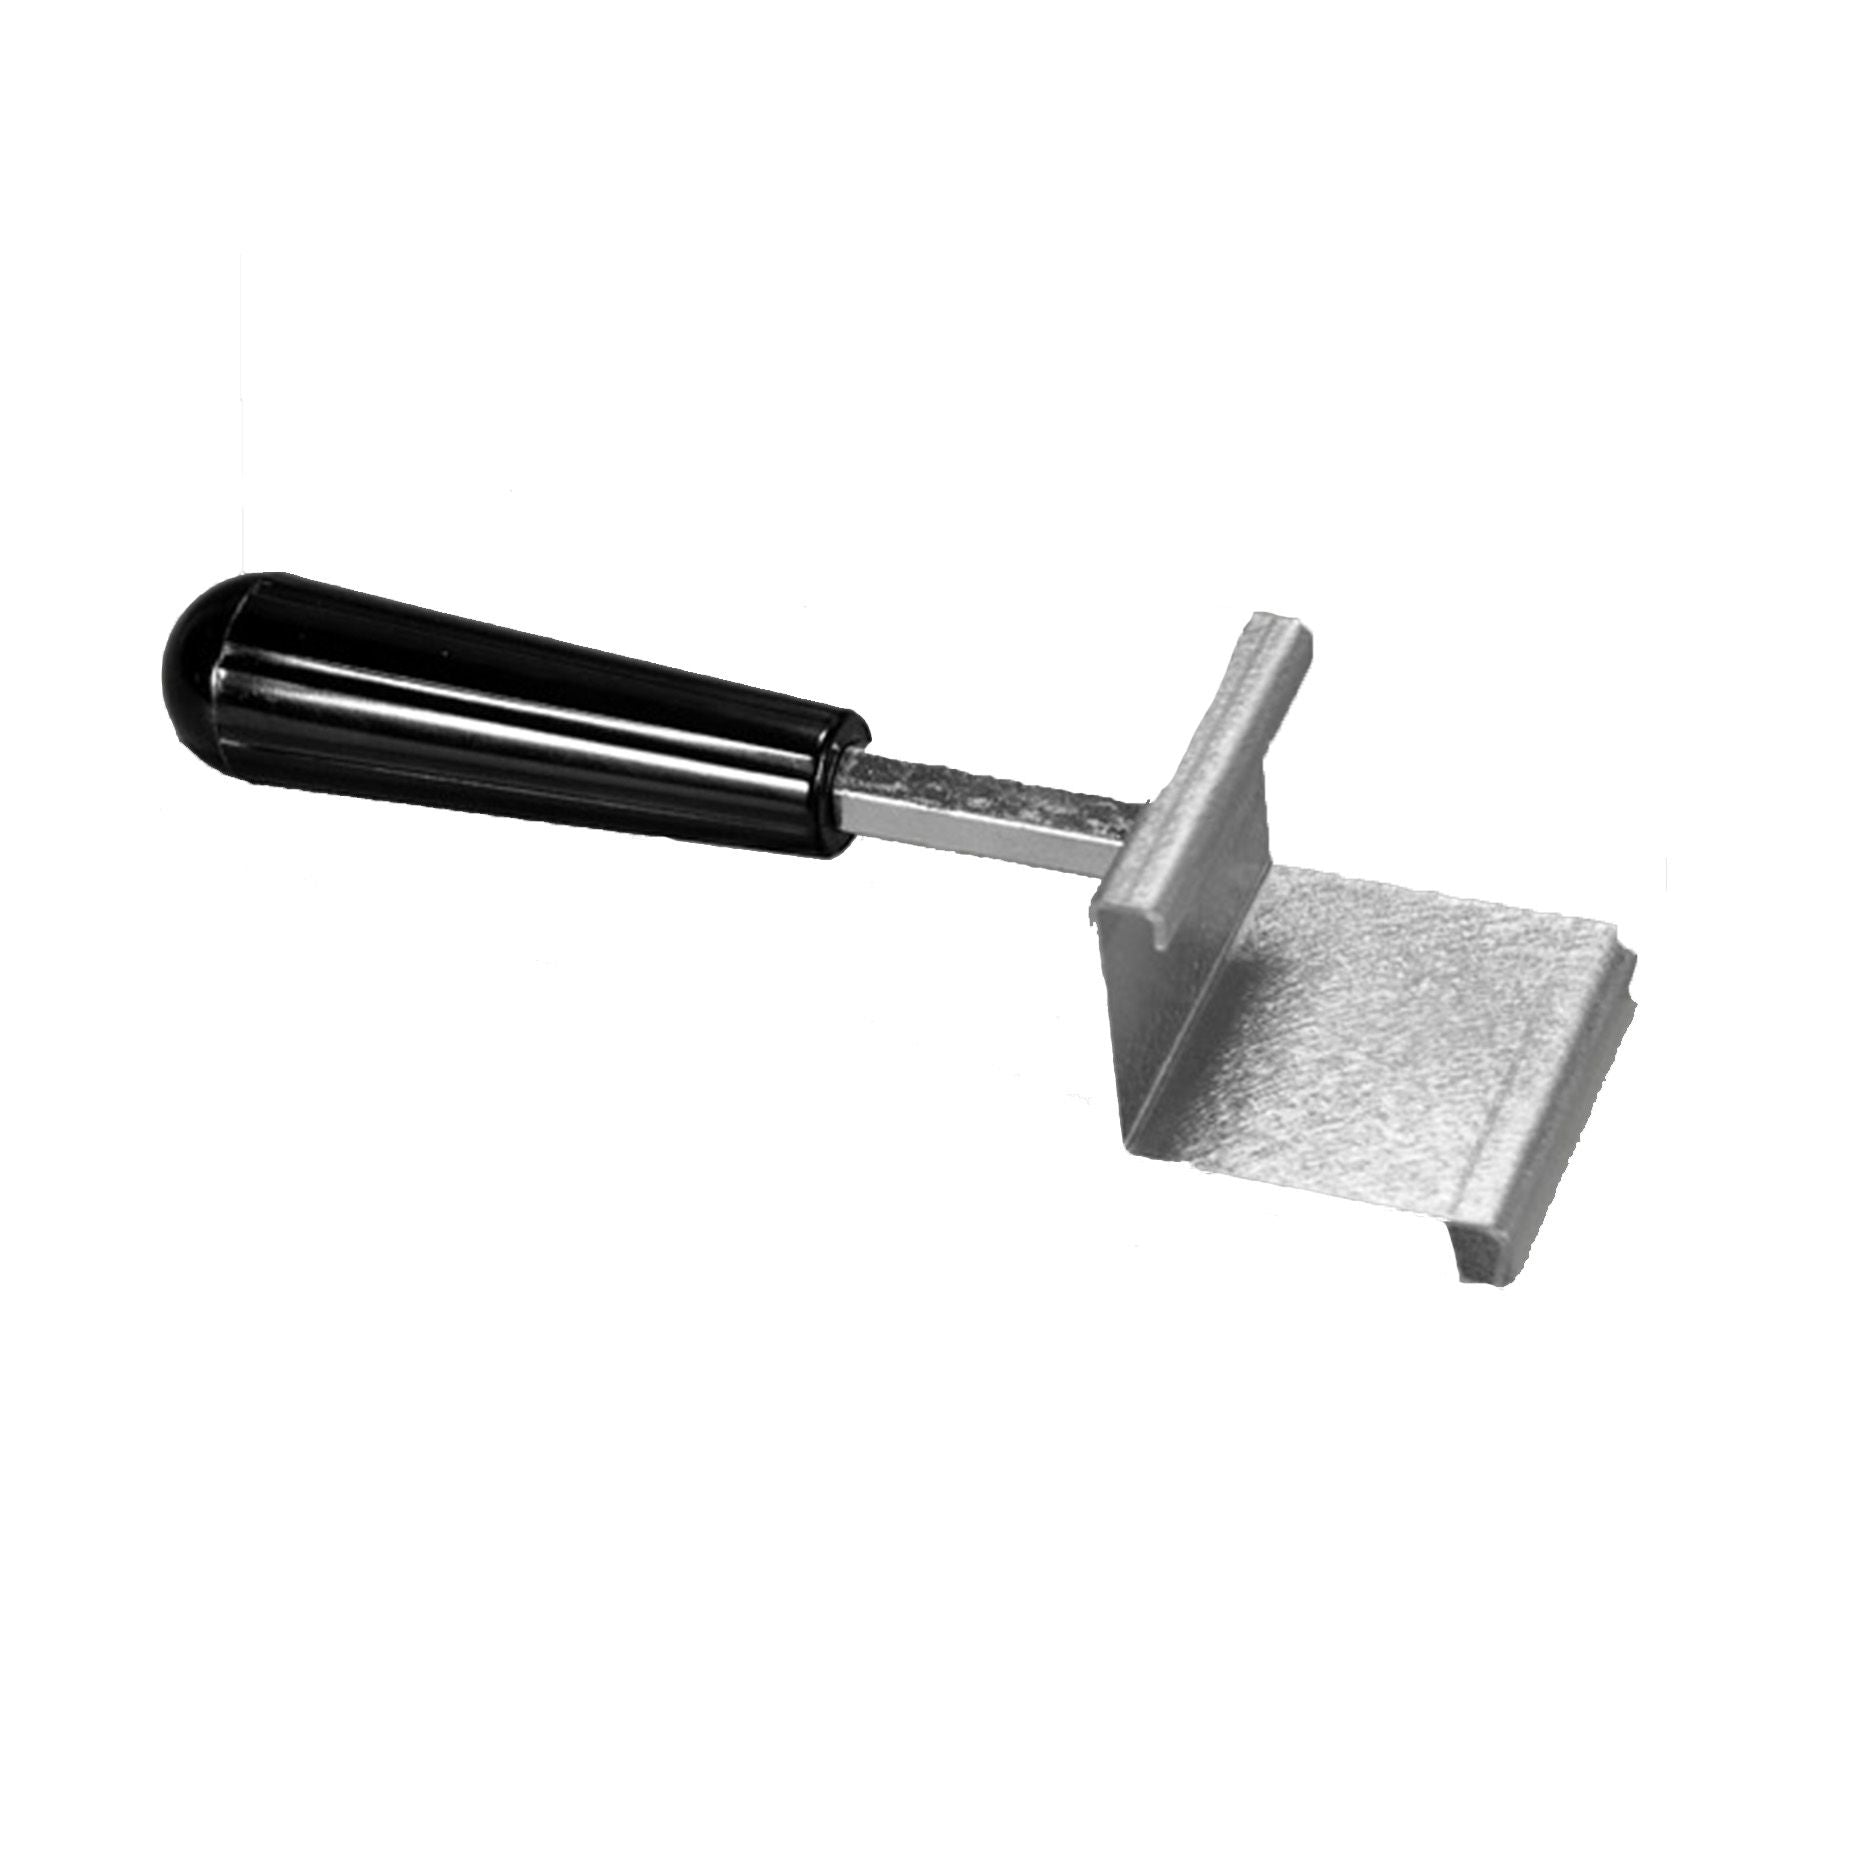 CPAC COX RapidHeat Tray Removal Tool